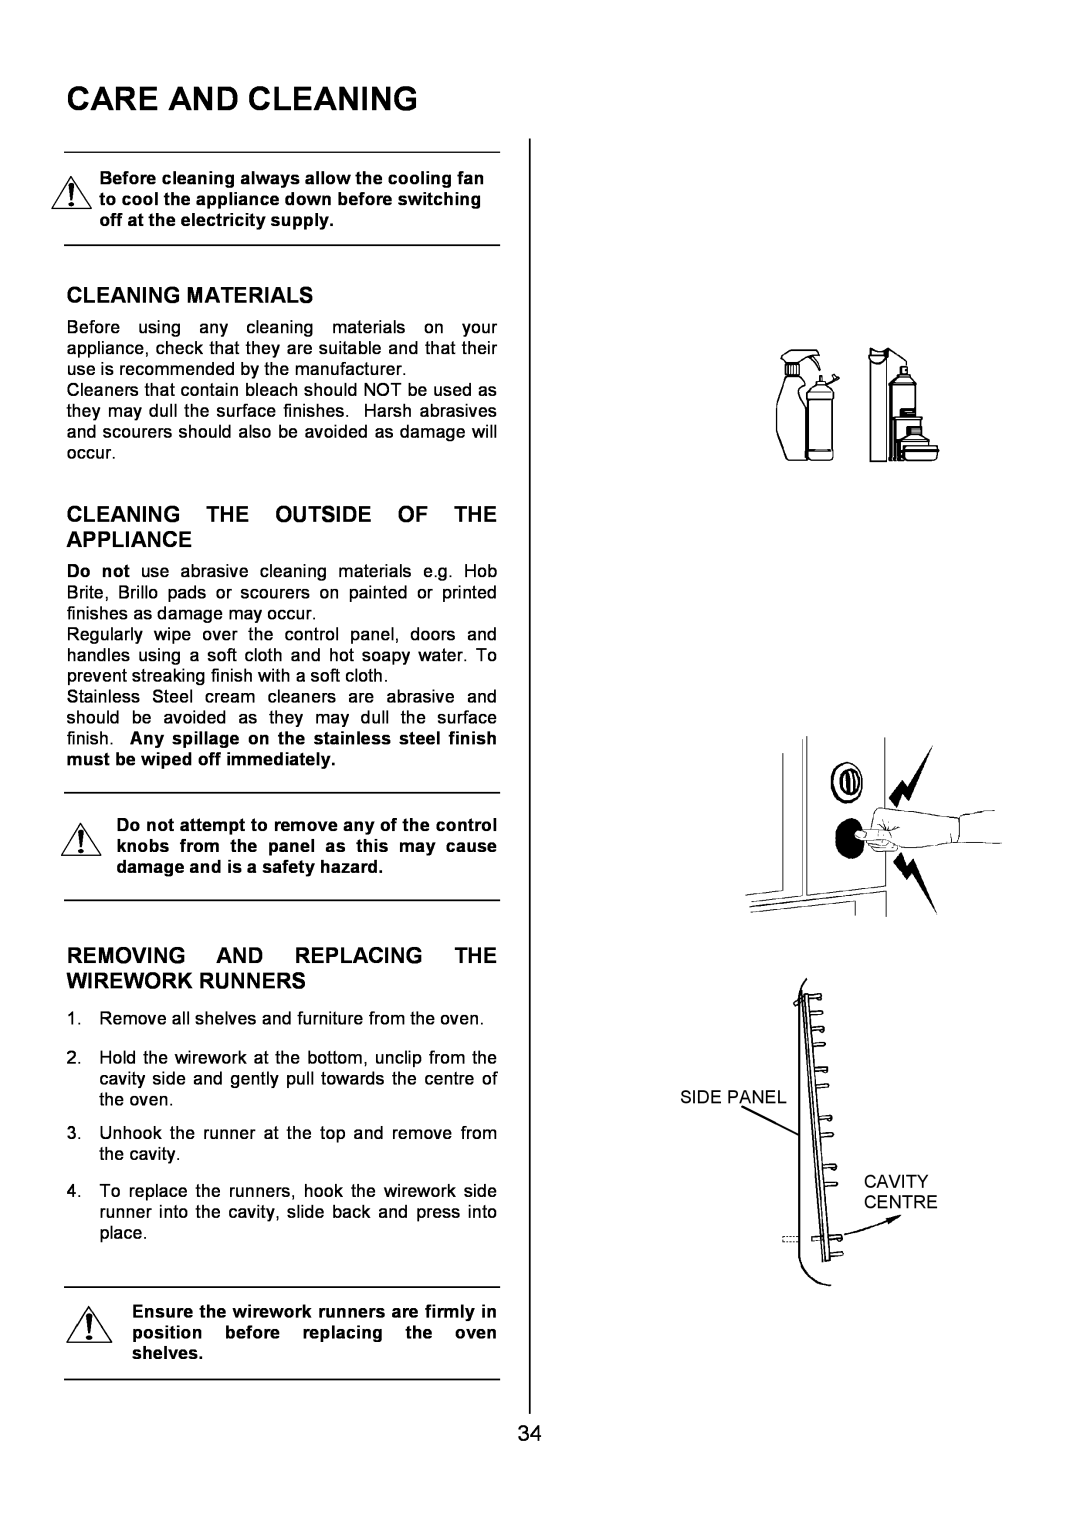 Electrolux U7101-4 operating instructions Care And Cleaning, Cleaning Materials, Cleaning The Outside Of The Appliance 